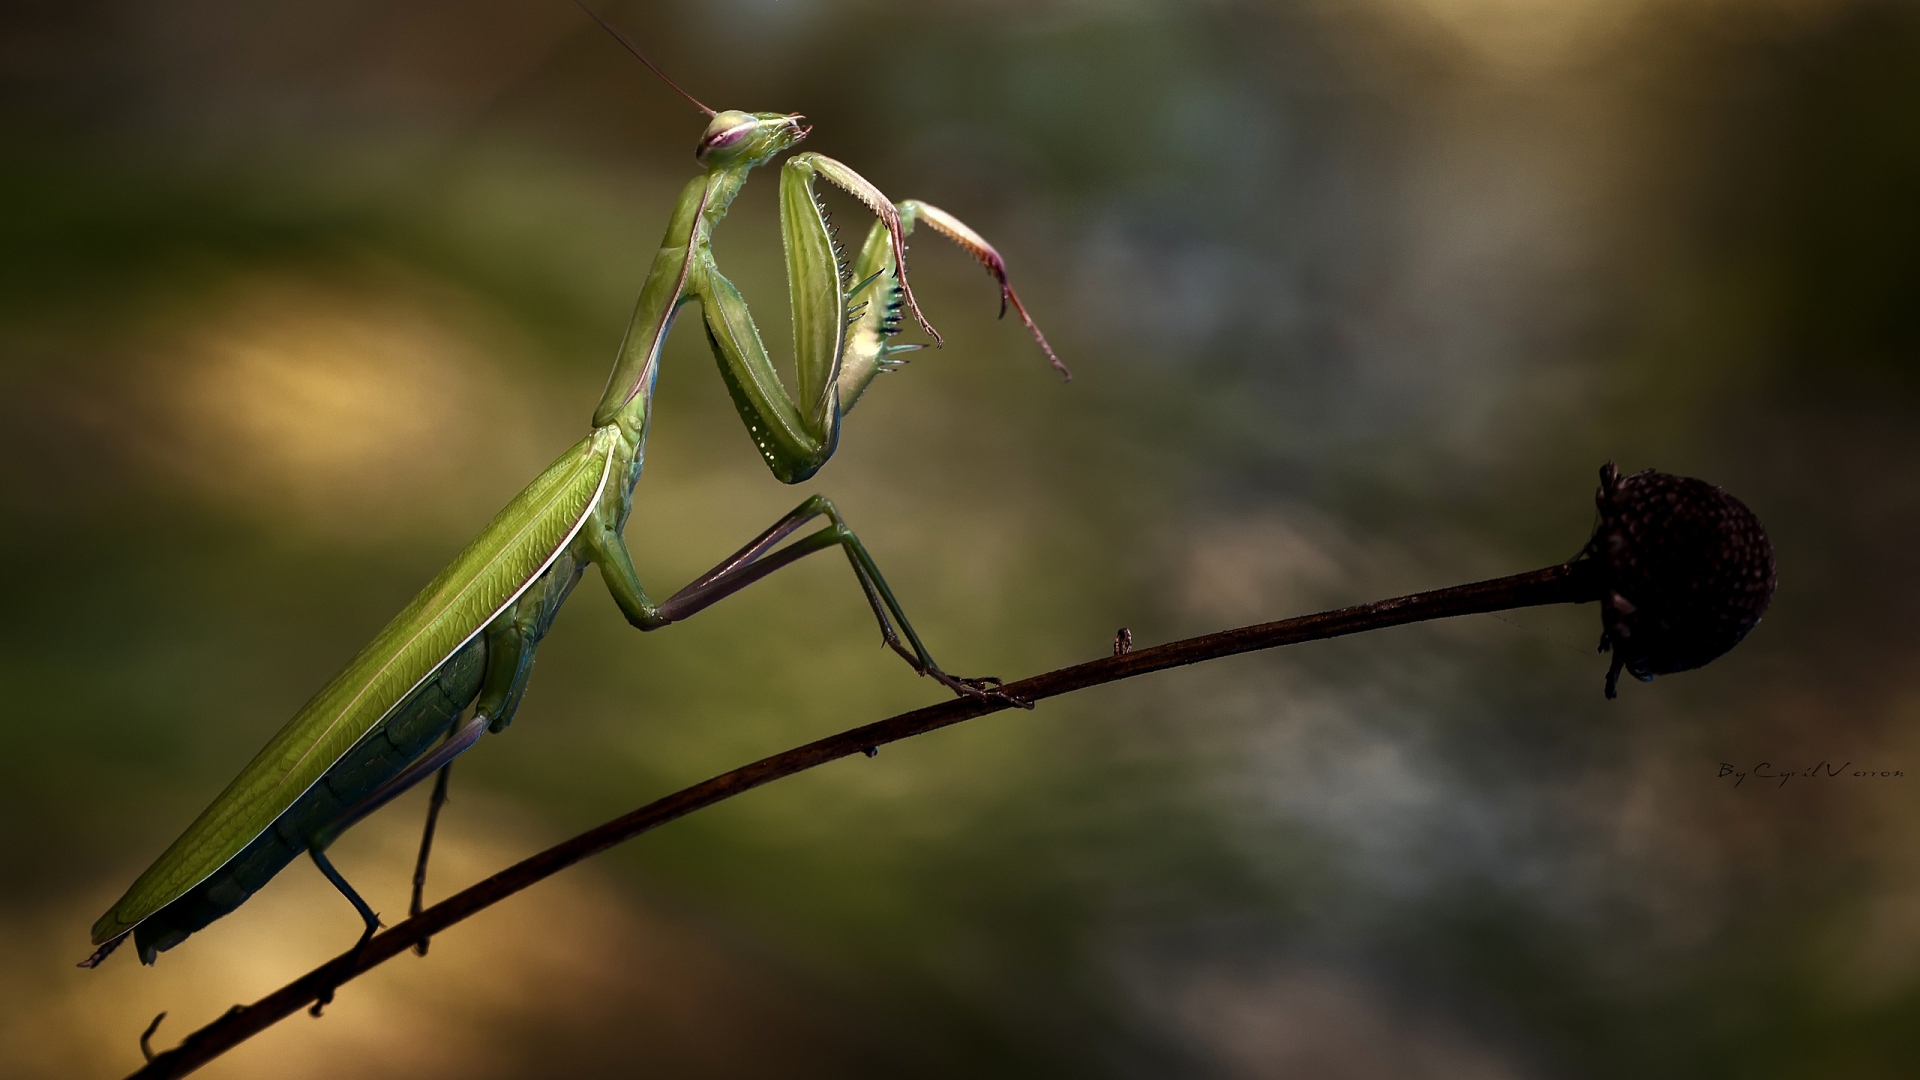 General 1920x1080 colorful photography insect nature closeup Praying Mantis blurred blurry background simple background minimalism